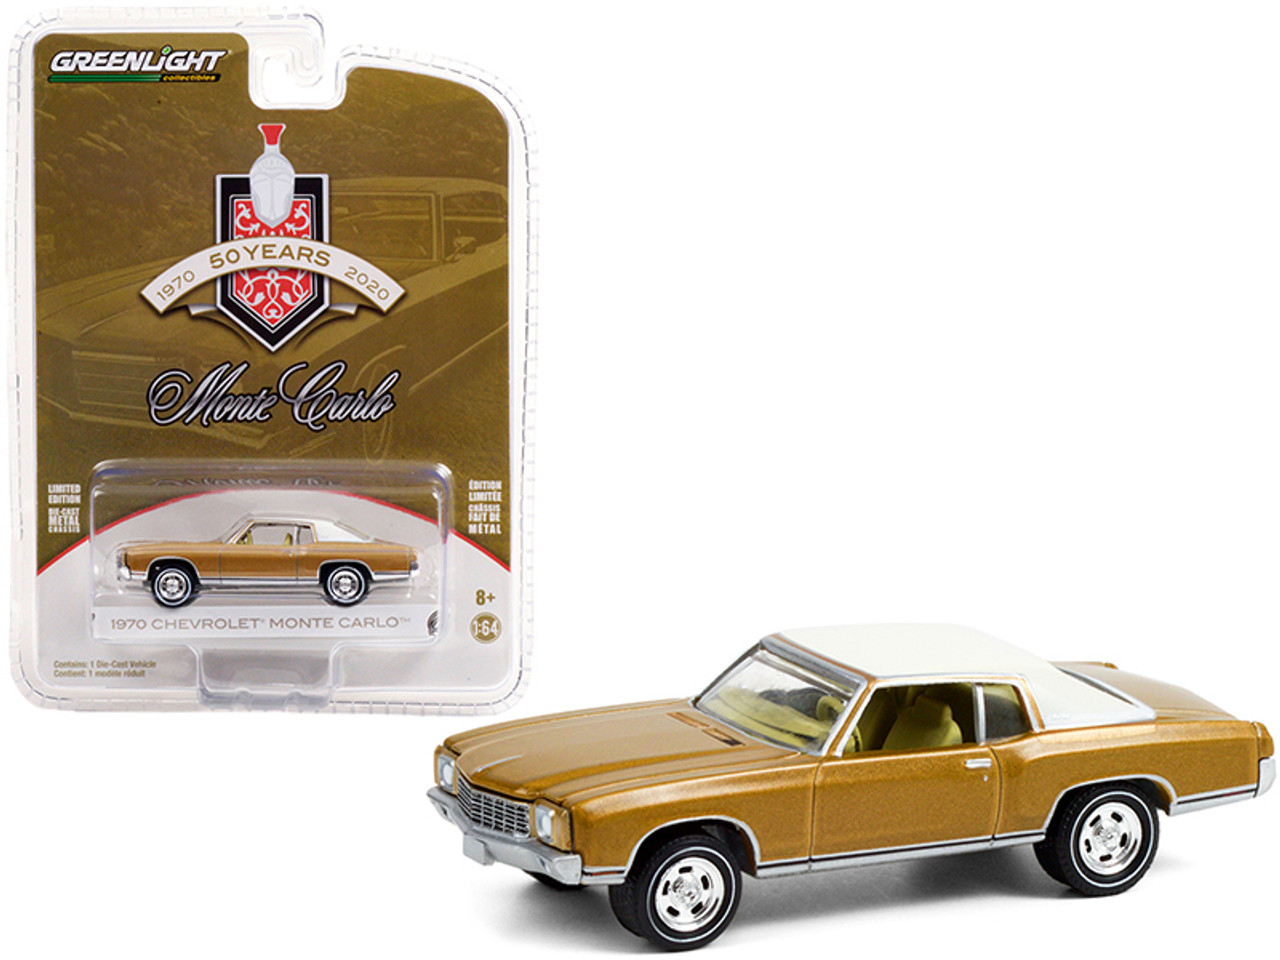 1970 Chevrolet Monte Carlo Gold with White Top "50th Anniversary of Monte Carlo" (1970-2020) "Anniversary Collection" Series 12 1/64 Diecast Model Car by Greenlight